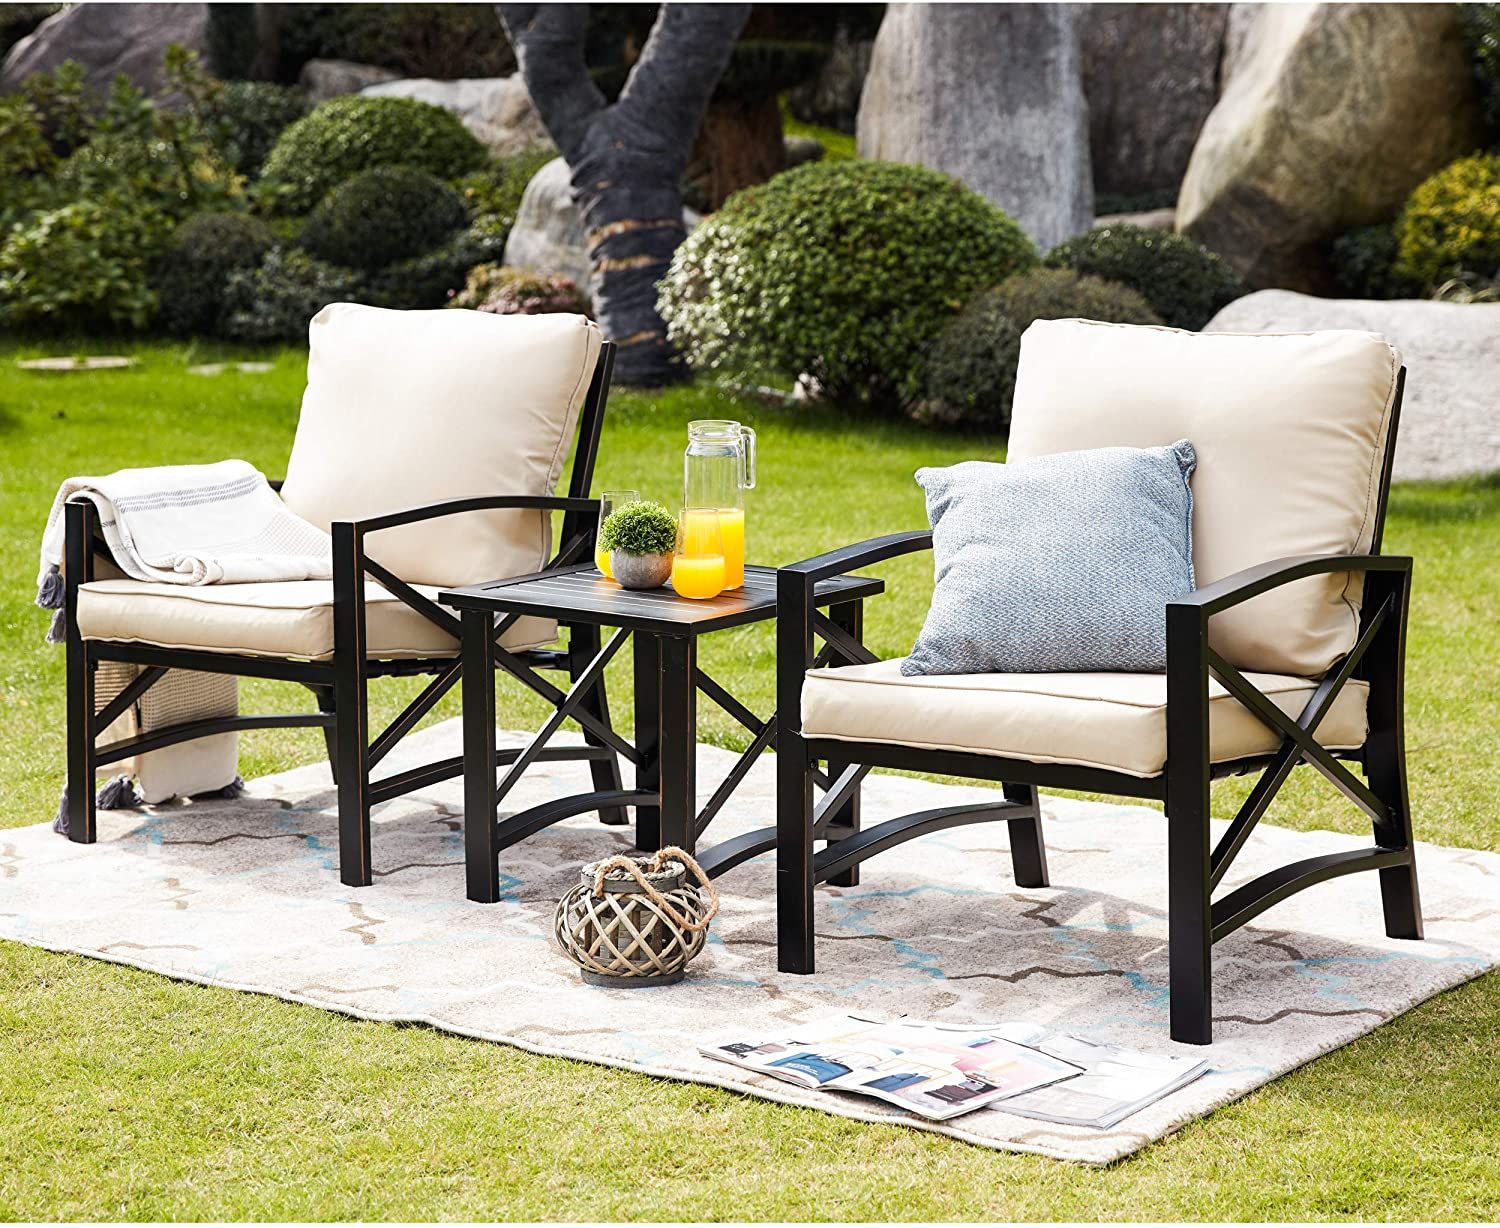 8 Best Patio Furniture Sets 2021 The, Comfy Outdoor Chair For Reading